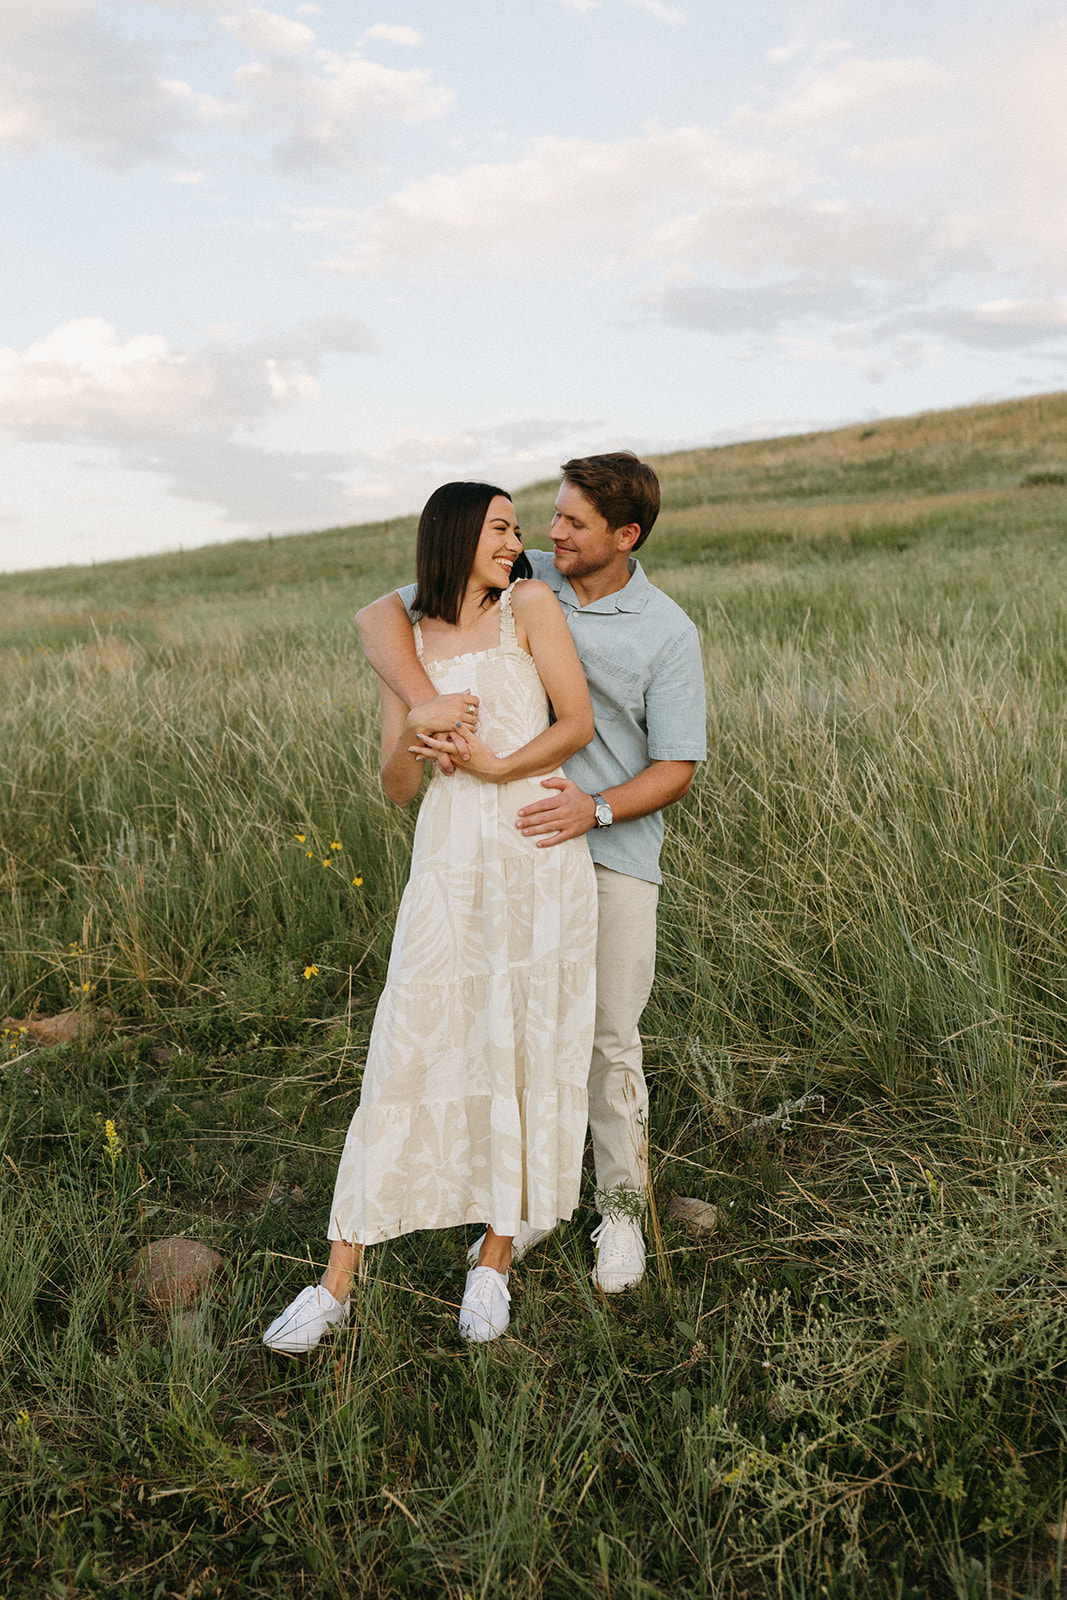 A couple in neutral attire embraces while surrounded by colorful wildflowers in a meadow in Boulder, Colorado